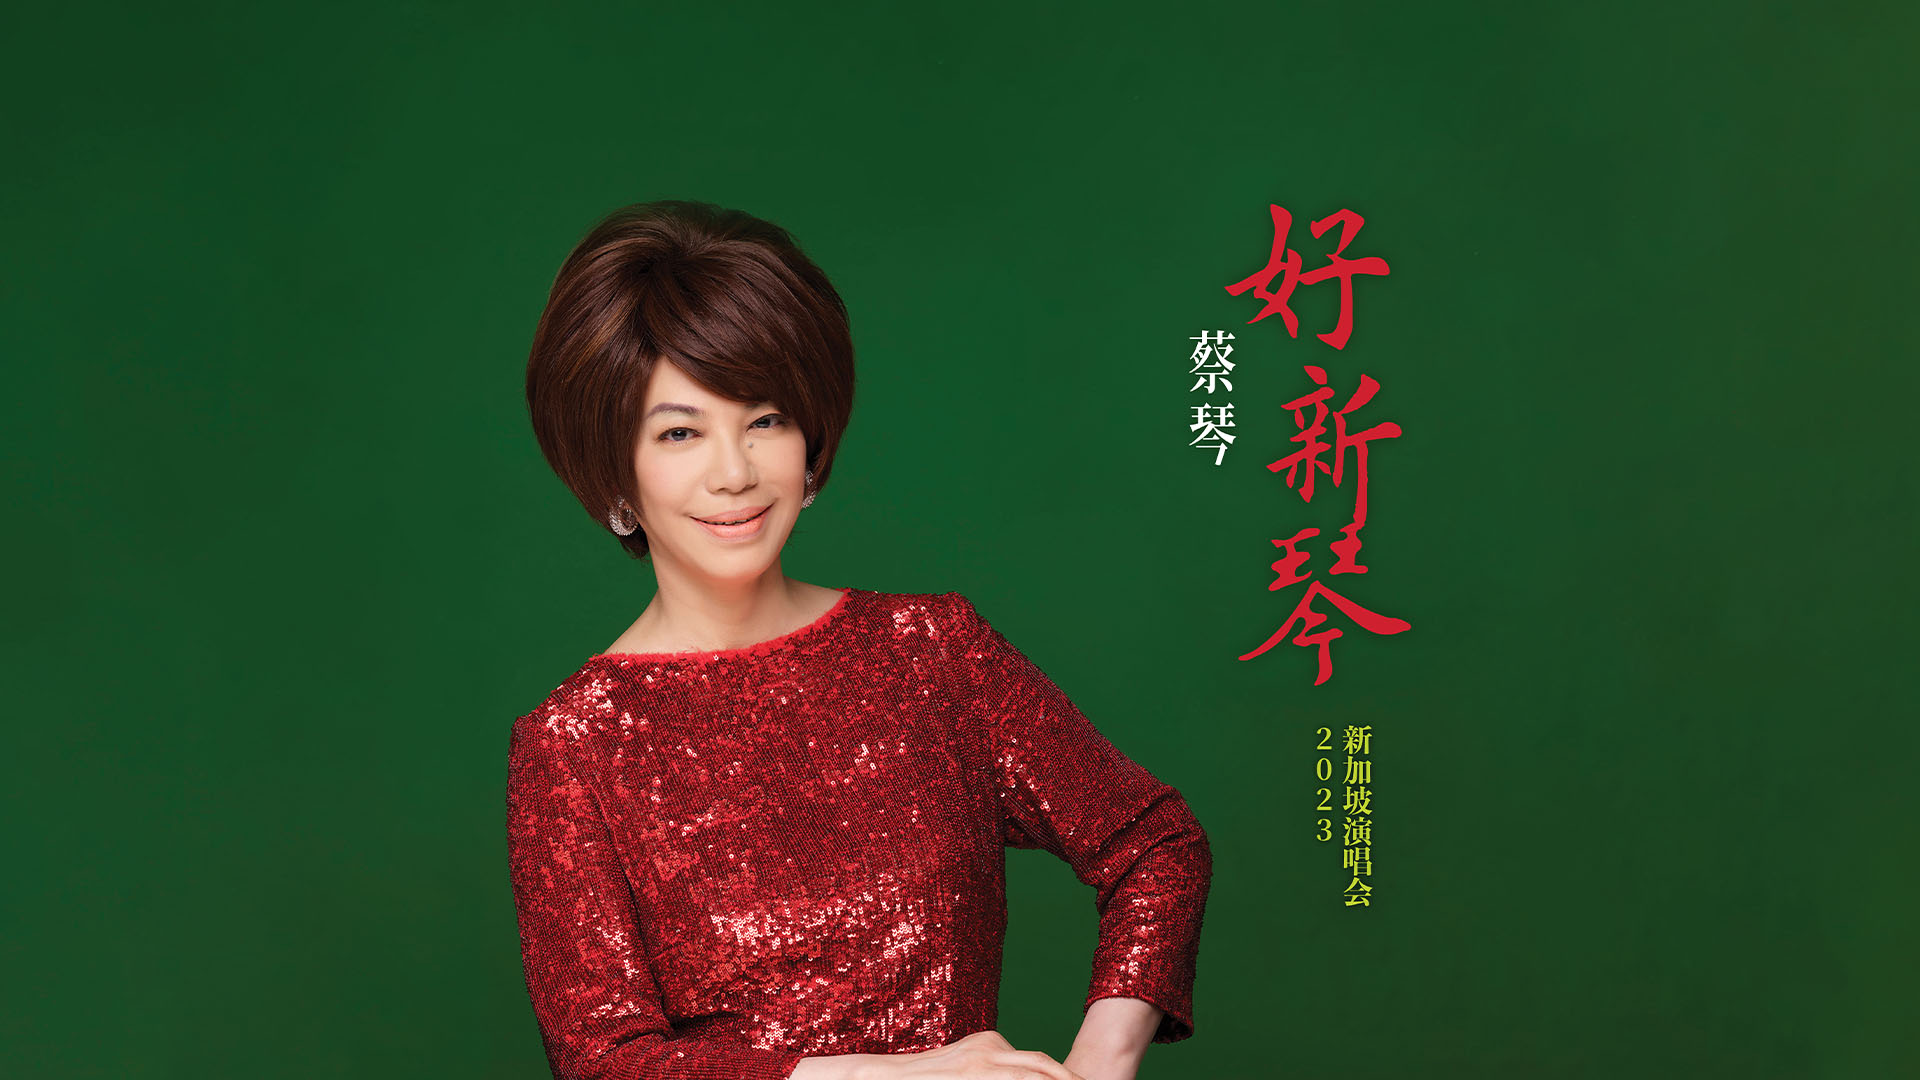 Tsai Chin Live in Singapore 2023 Concerts in Singapore Marina Bay Sands